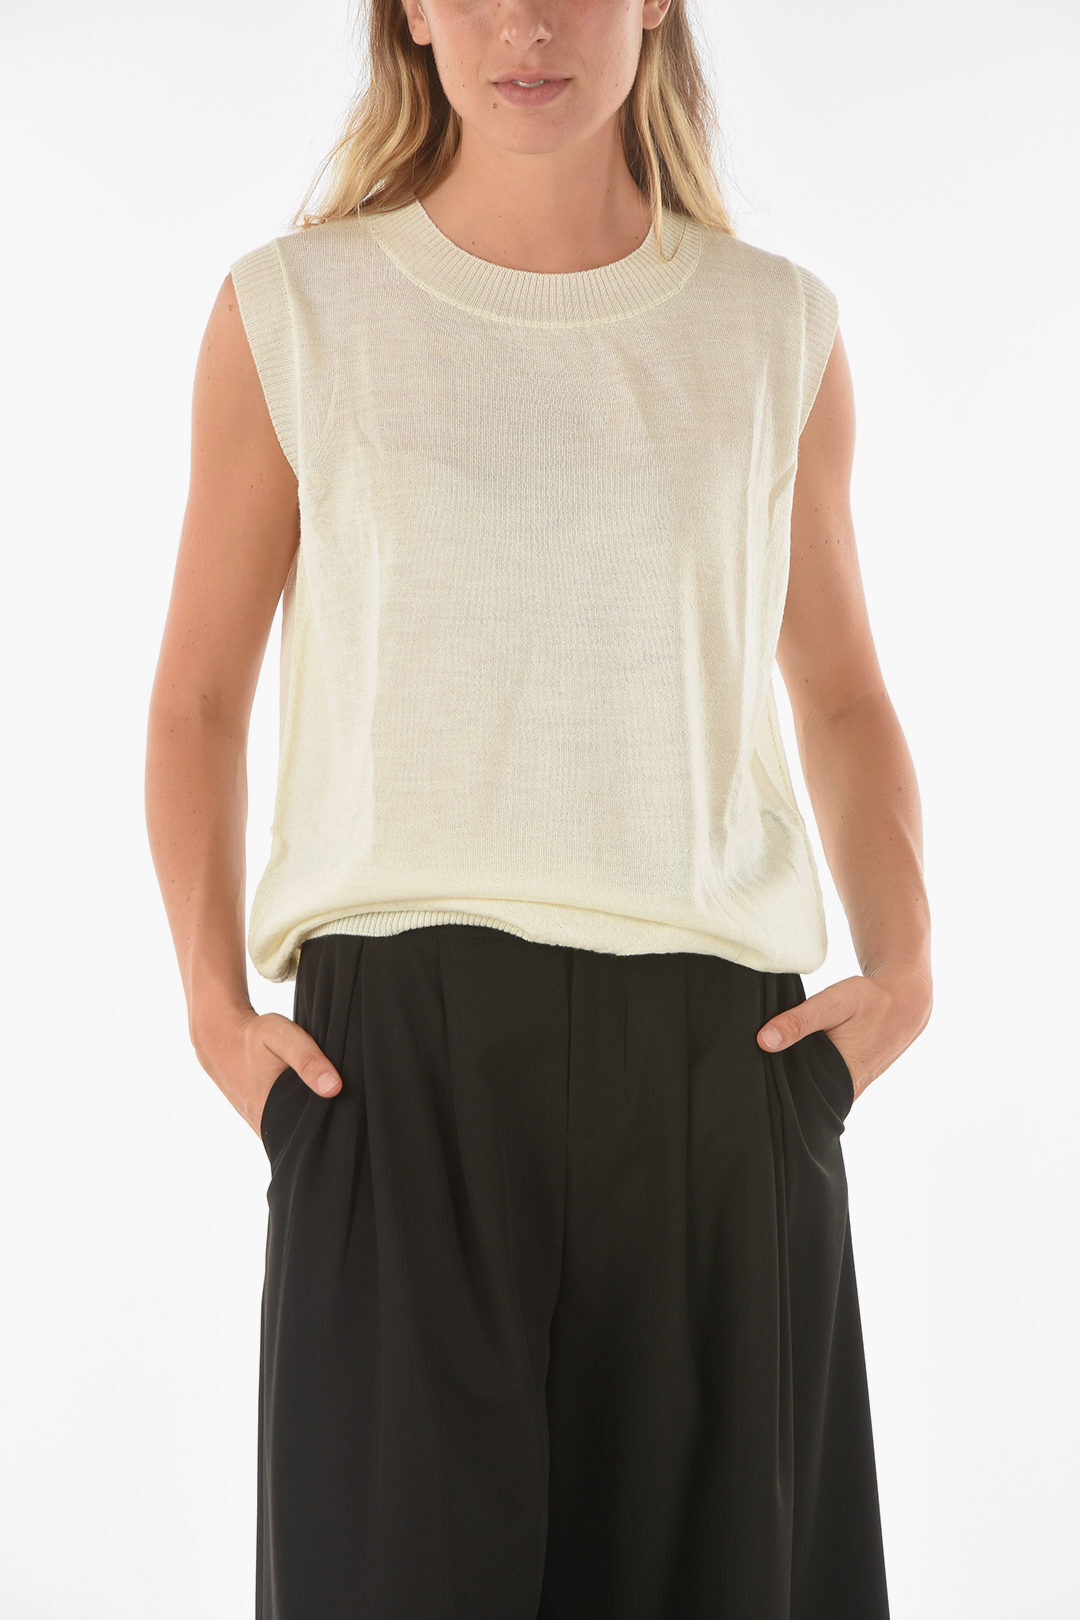 IXOS イクソス ニットウェア E21I20023 CURL LATTE レディース KNITTED CURLIN TANK TOP WITH RIBBED HEMS 【関税・送料無料】【ラッピング無料】 dk